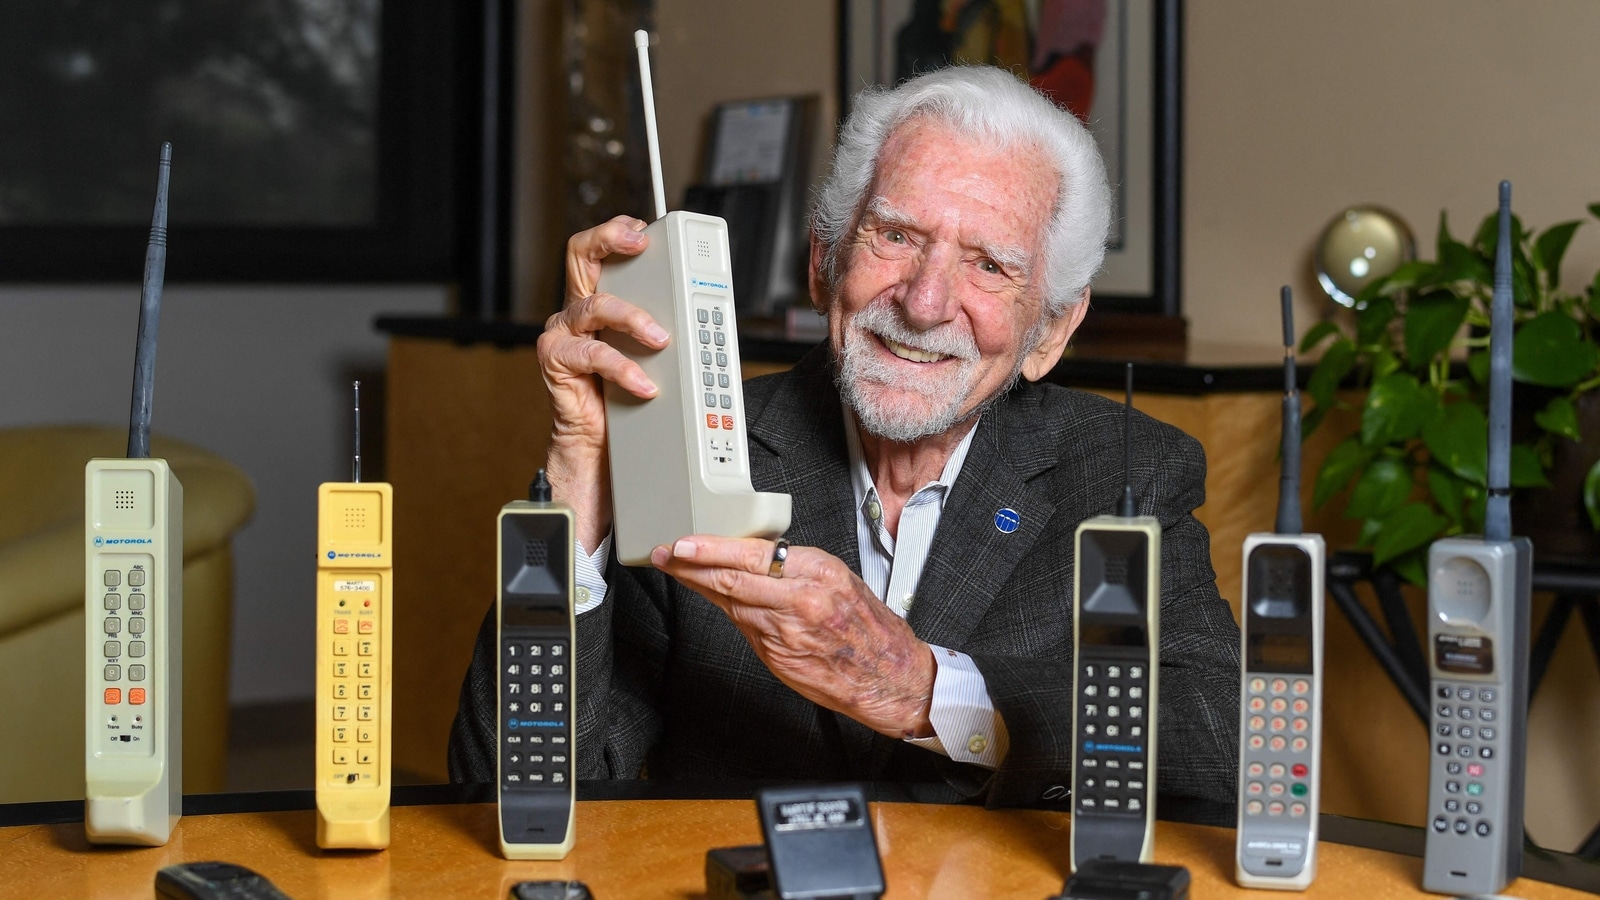 Take your eyes off your mobile phone, says inventor, 50 years on